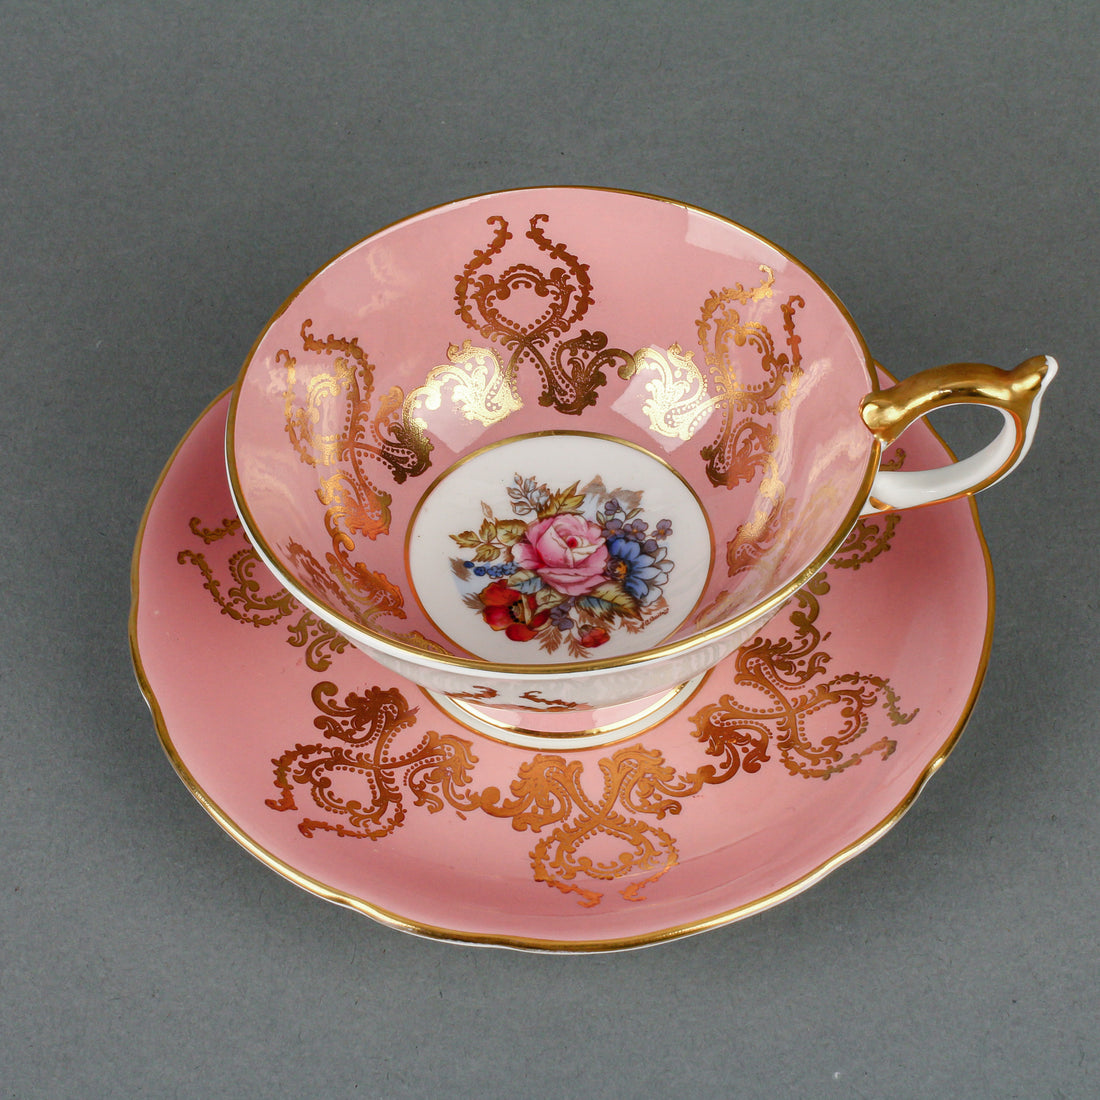 AYNSLEY JA Bailey Hand-Painted Rose Floral Centre Cup & Saucer